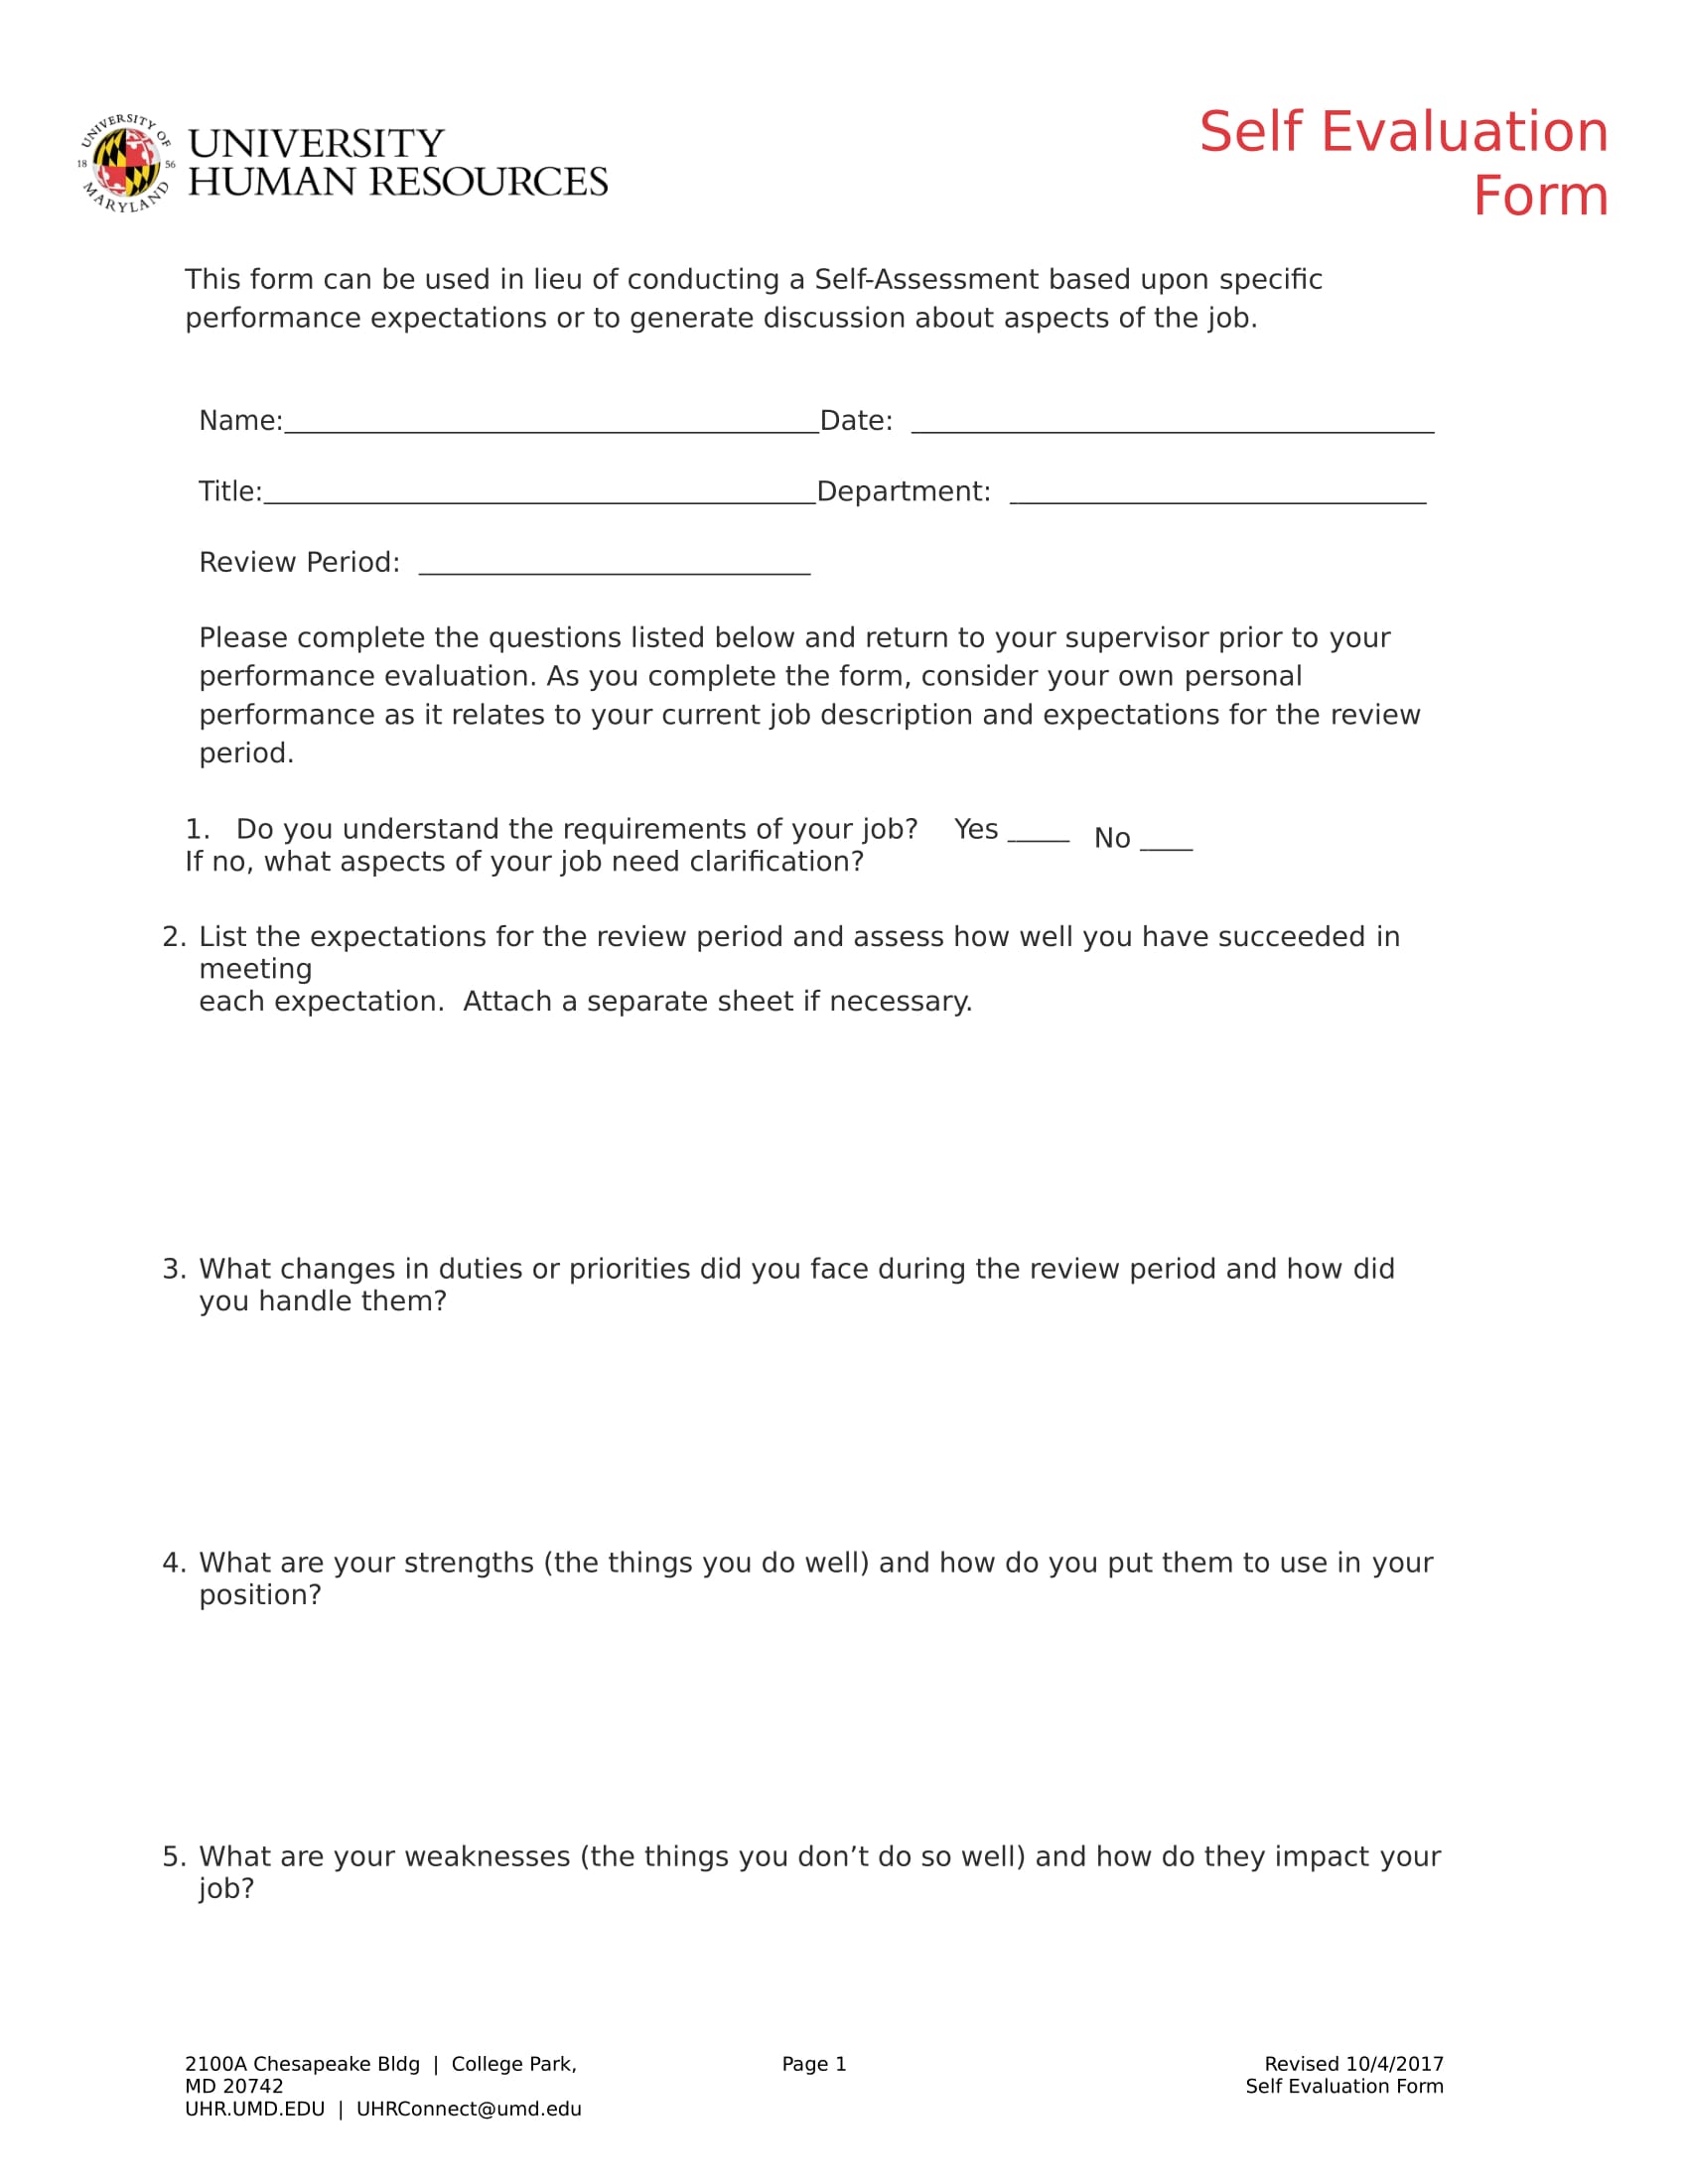 employee self evaluation form in doc 11